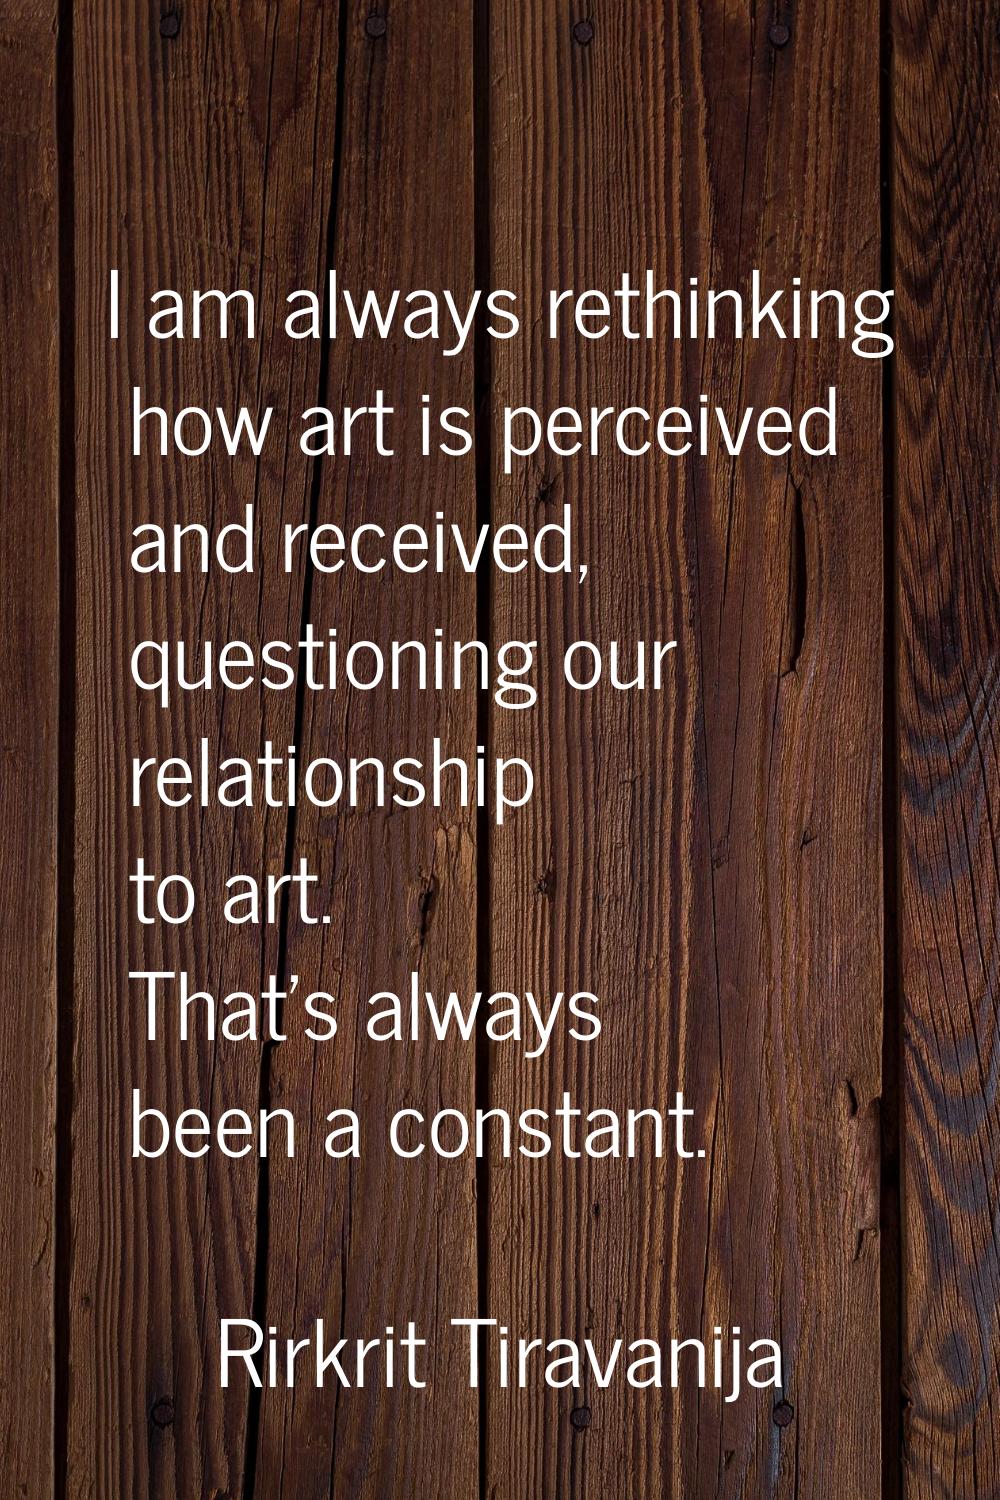 I am always rethinking how art is perceived and received, questioning our relationship to art. That